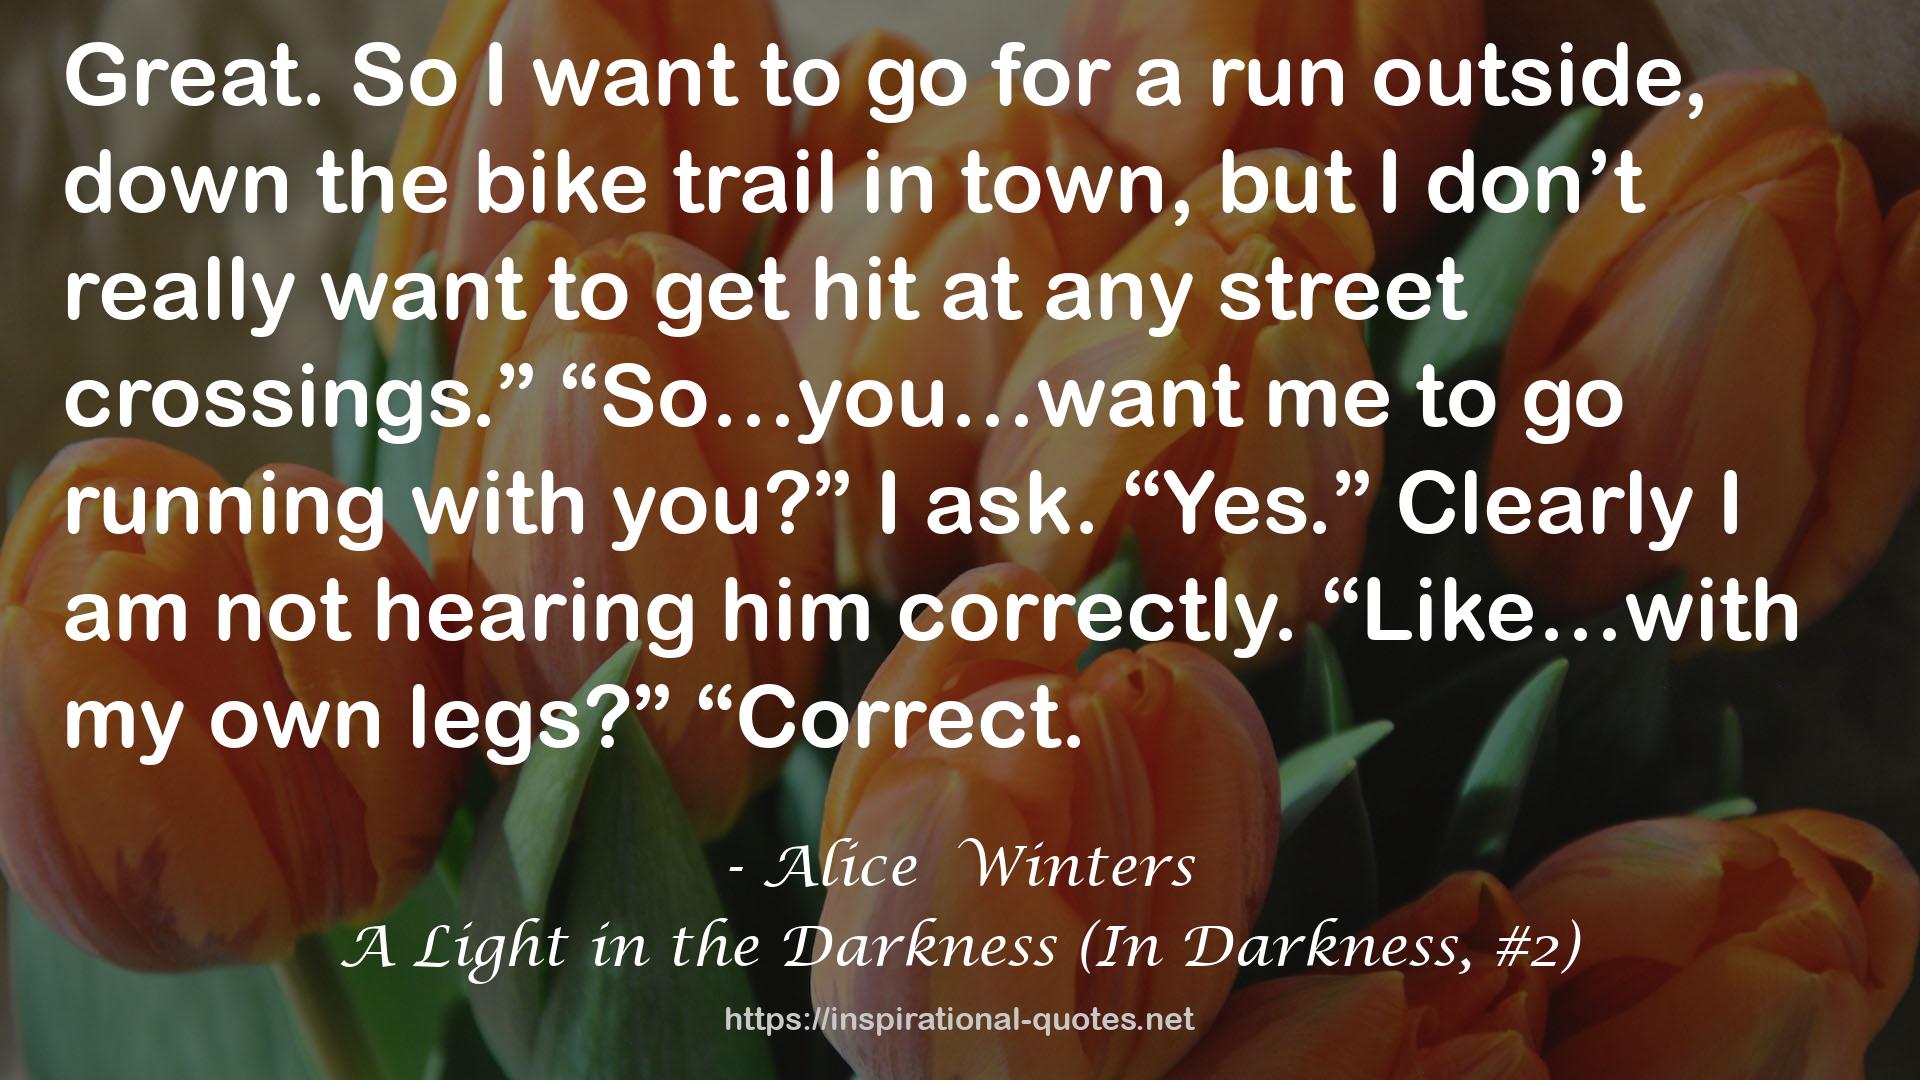 A Light in the Darkness (In Darkness, #2) QUOTES